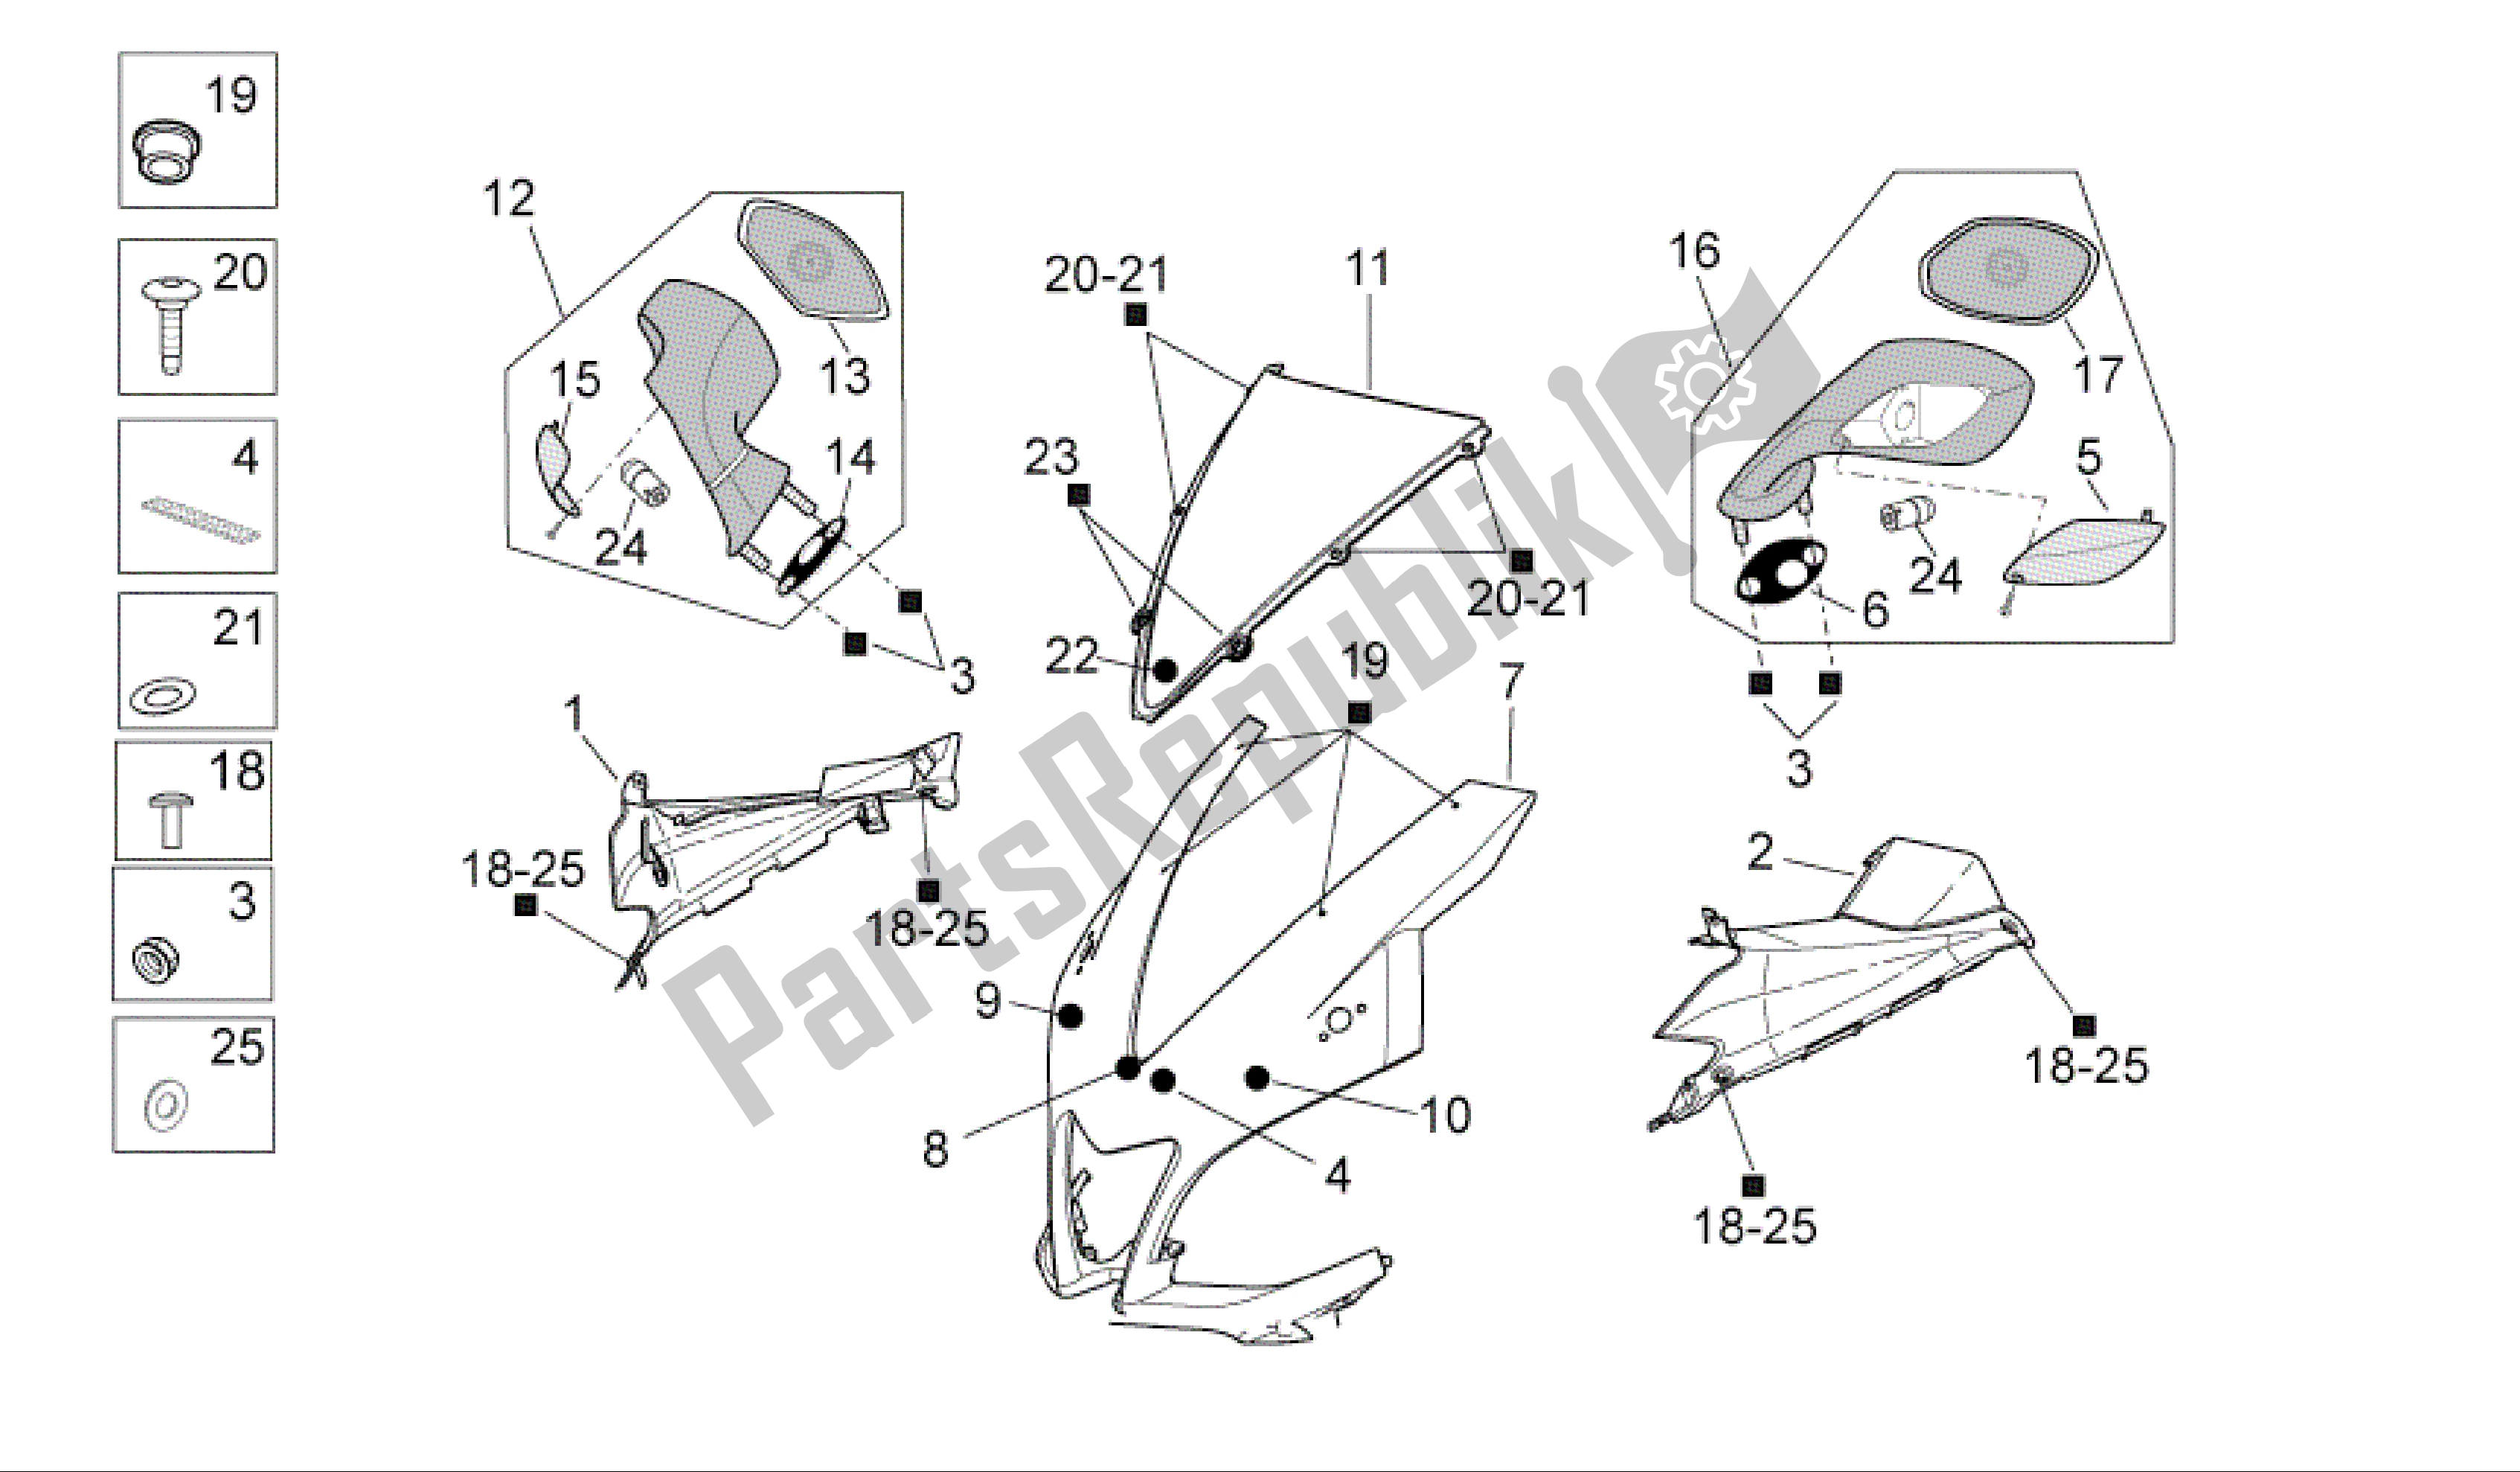 All parts for the Front Body I of the Aprilia RSV4 R 3980 1000 2009 - 2010